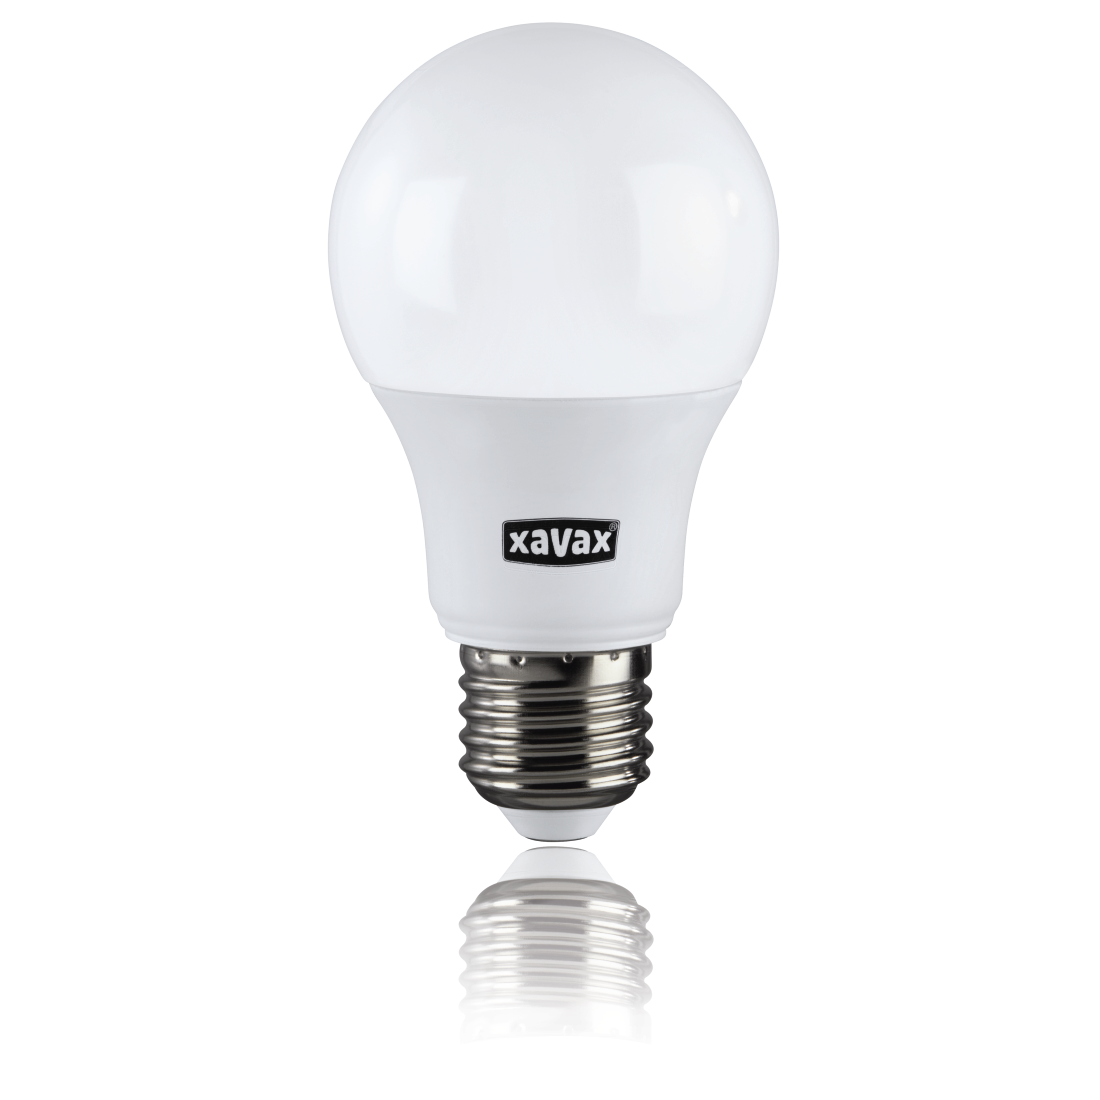 abx2 High-Res Image 2 - Xavax, LED Lamp, E27, 806 lm Replaces 57 W, Incandescent, warm, 3-stage dimmable